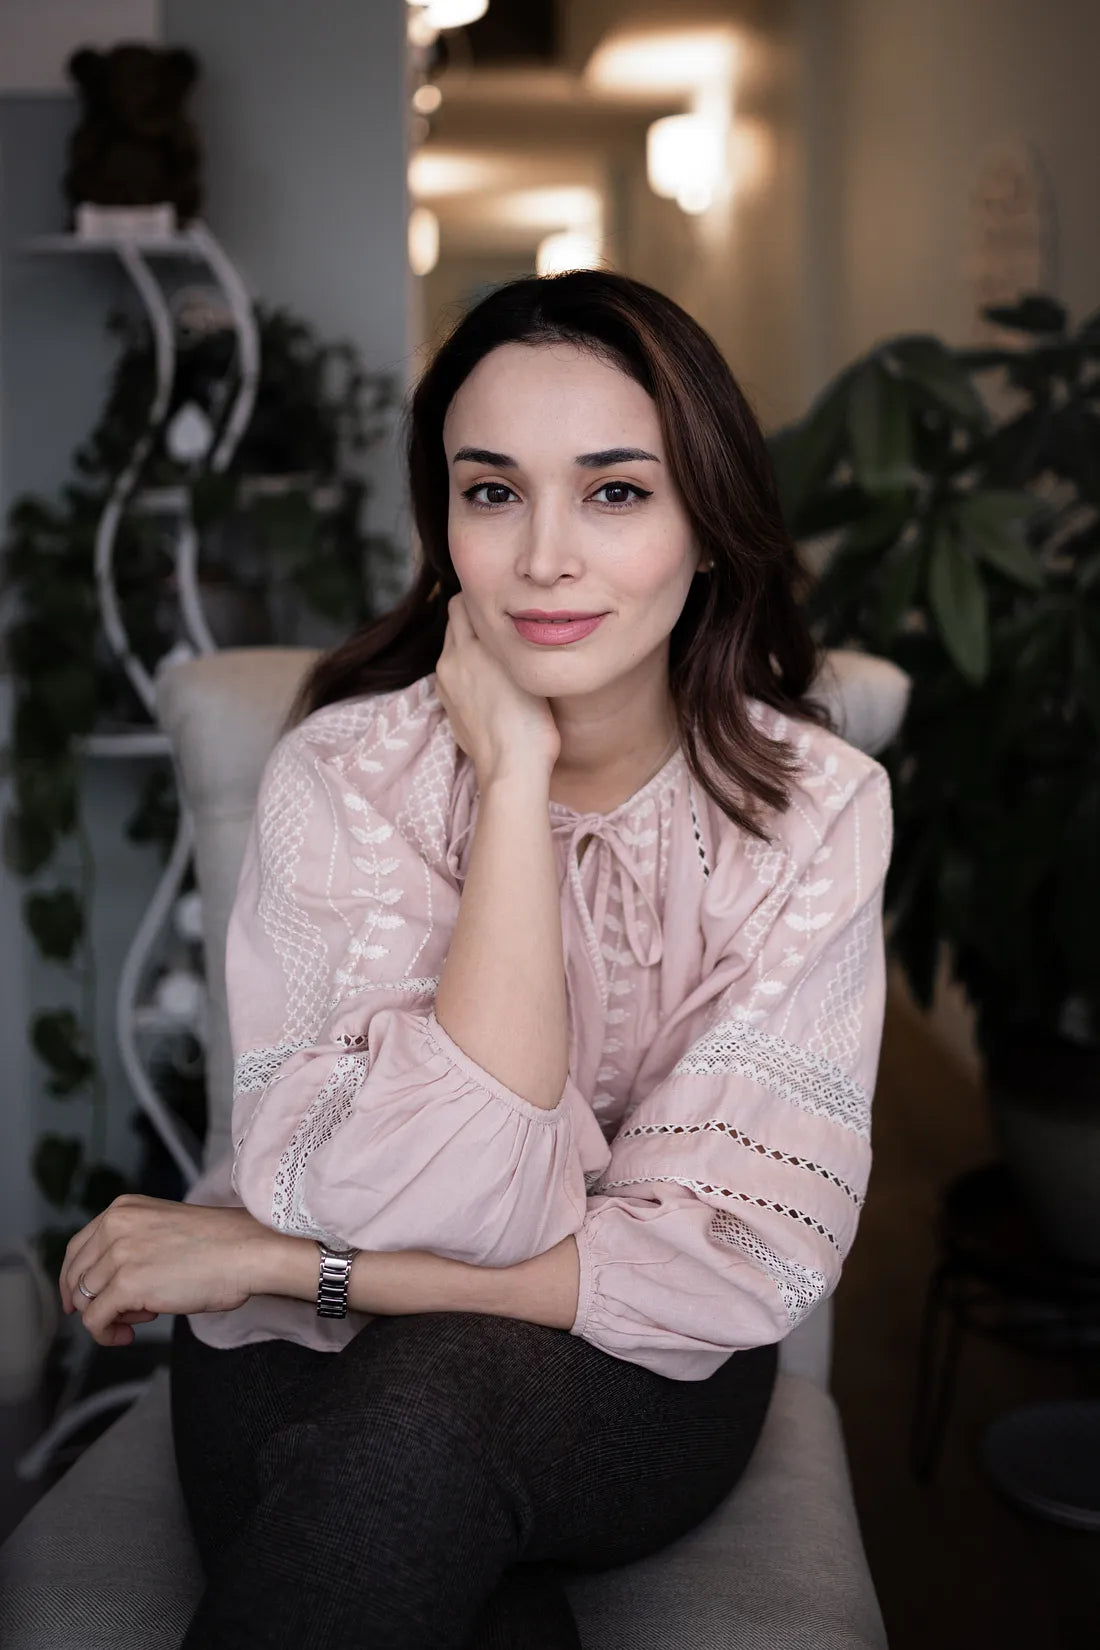 Women In Wellness: Nasim Delfaninejad Of Ova Women’s Health Physiotherapy On The Five Lifestyle Tweaks That Will Help Support People’s Journey Towards Better Wellbeing